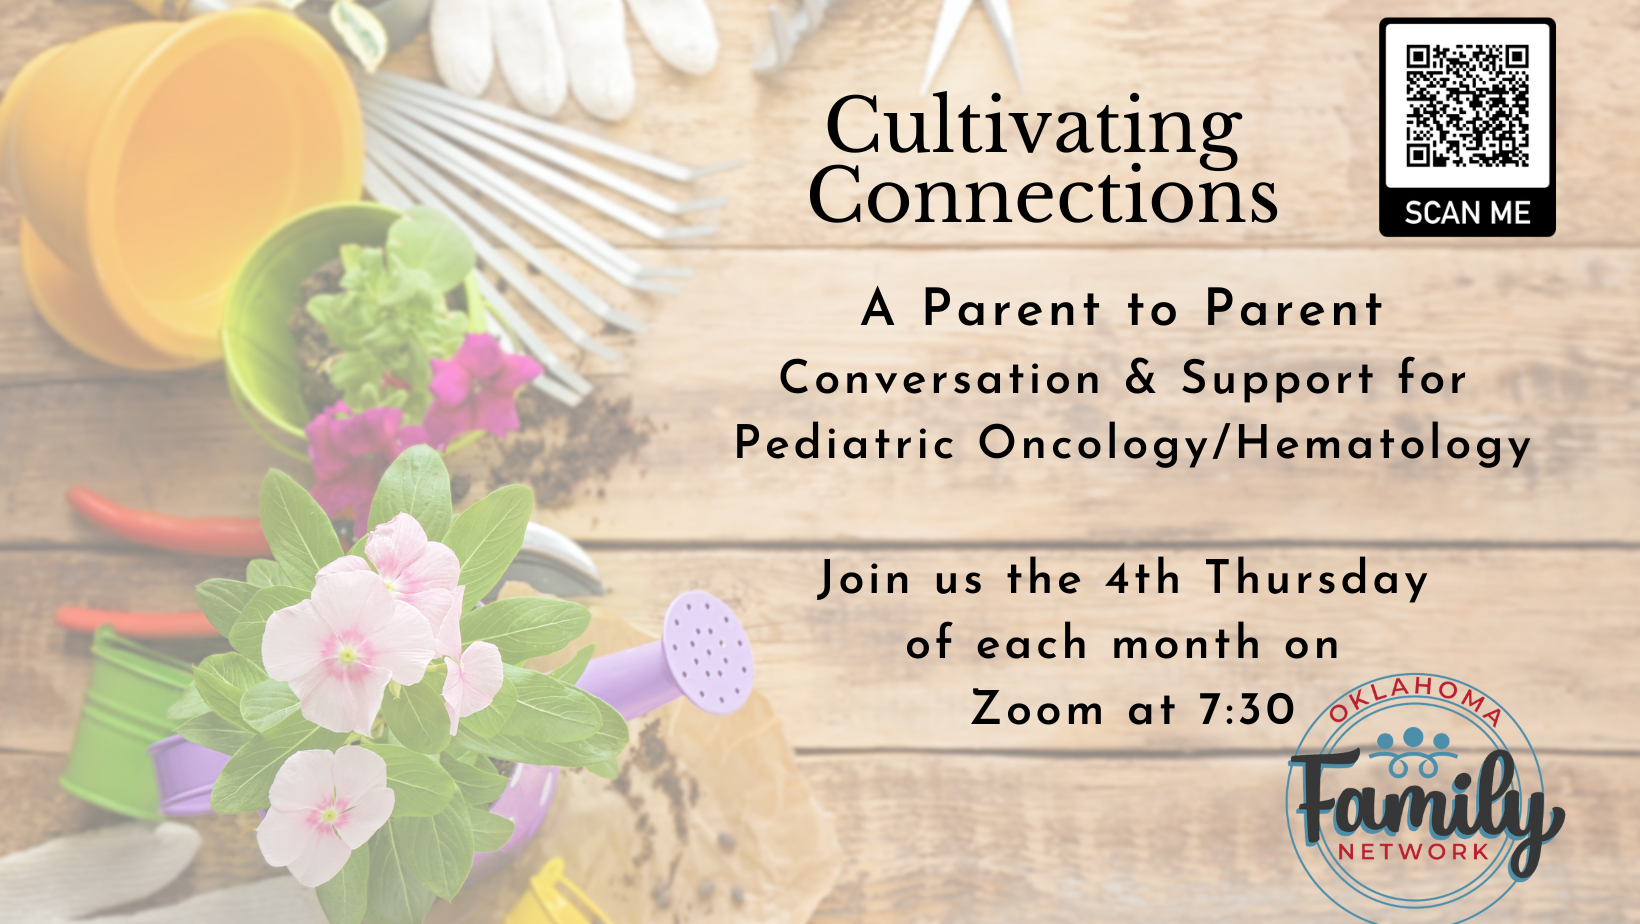 Cultivating Connections a parent to parent conversation and support pediatric oncology and hematology